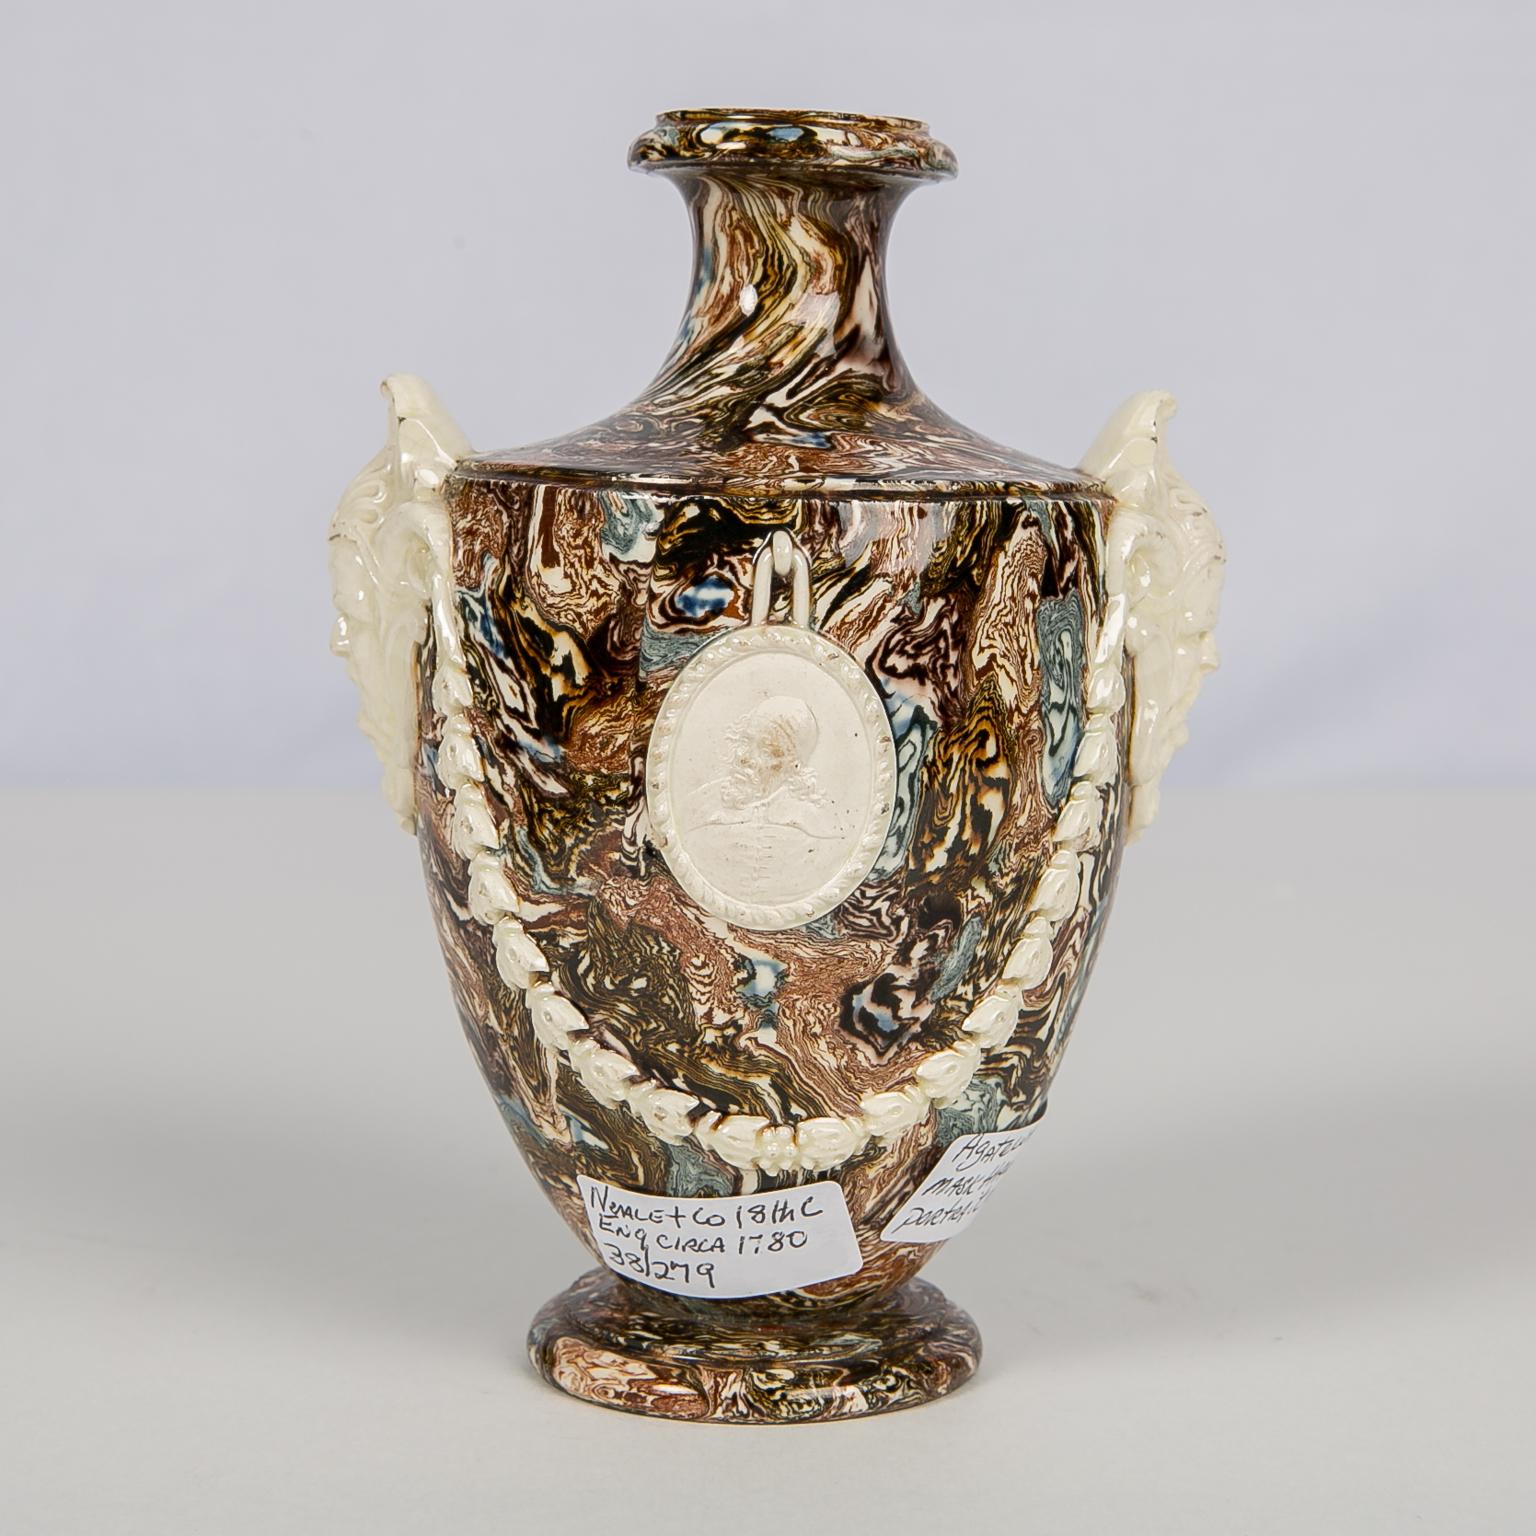 Glazed Solid Agateware Vase 18th Century Made by Neale & Co.